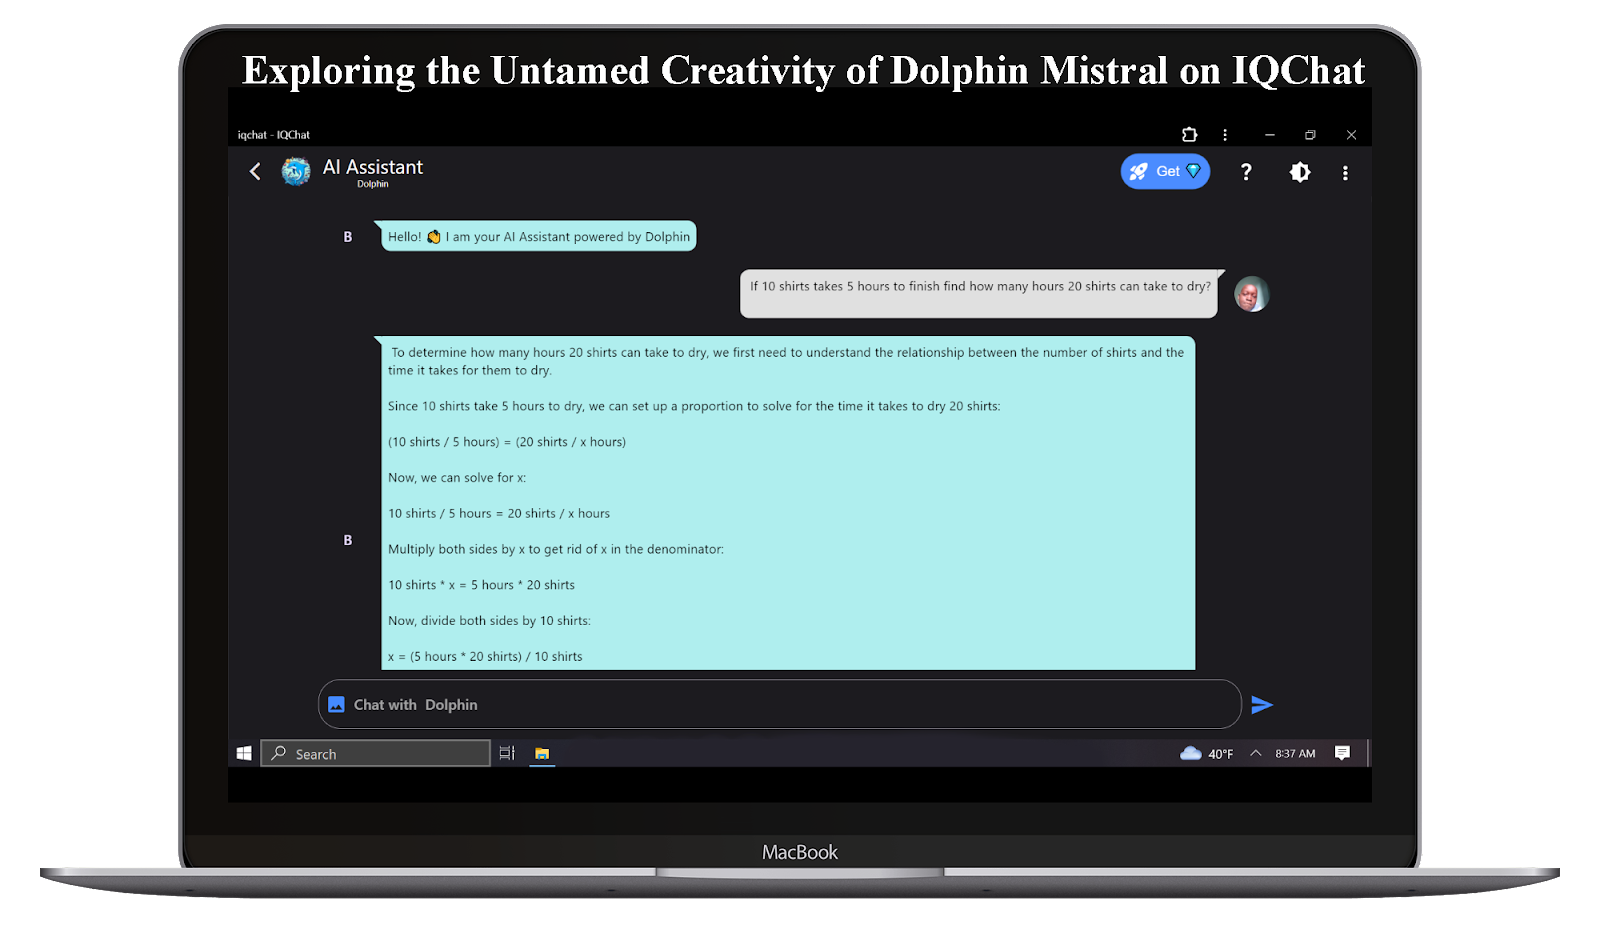 Exploring the Untamed Creativity of Dolphin Mistral Uncensored Model on IQChat